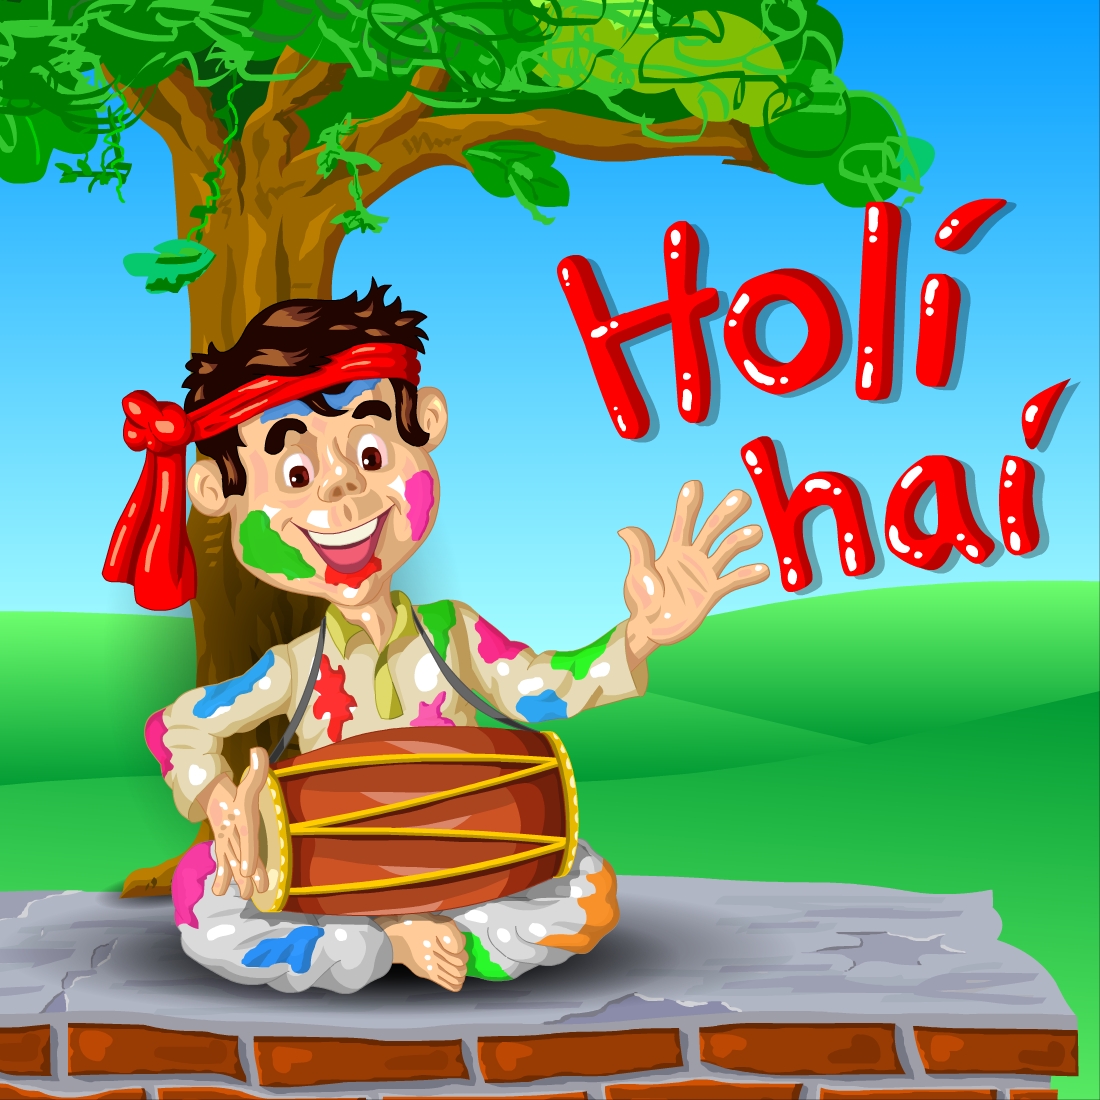 Cartoon of a man playing a drum in front of a tree.